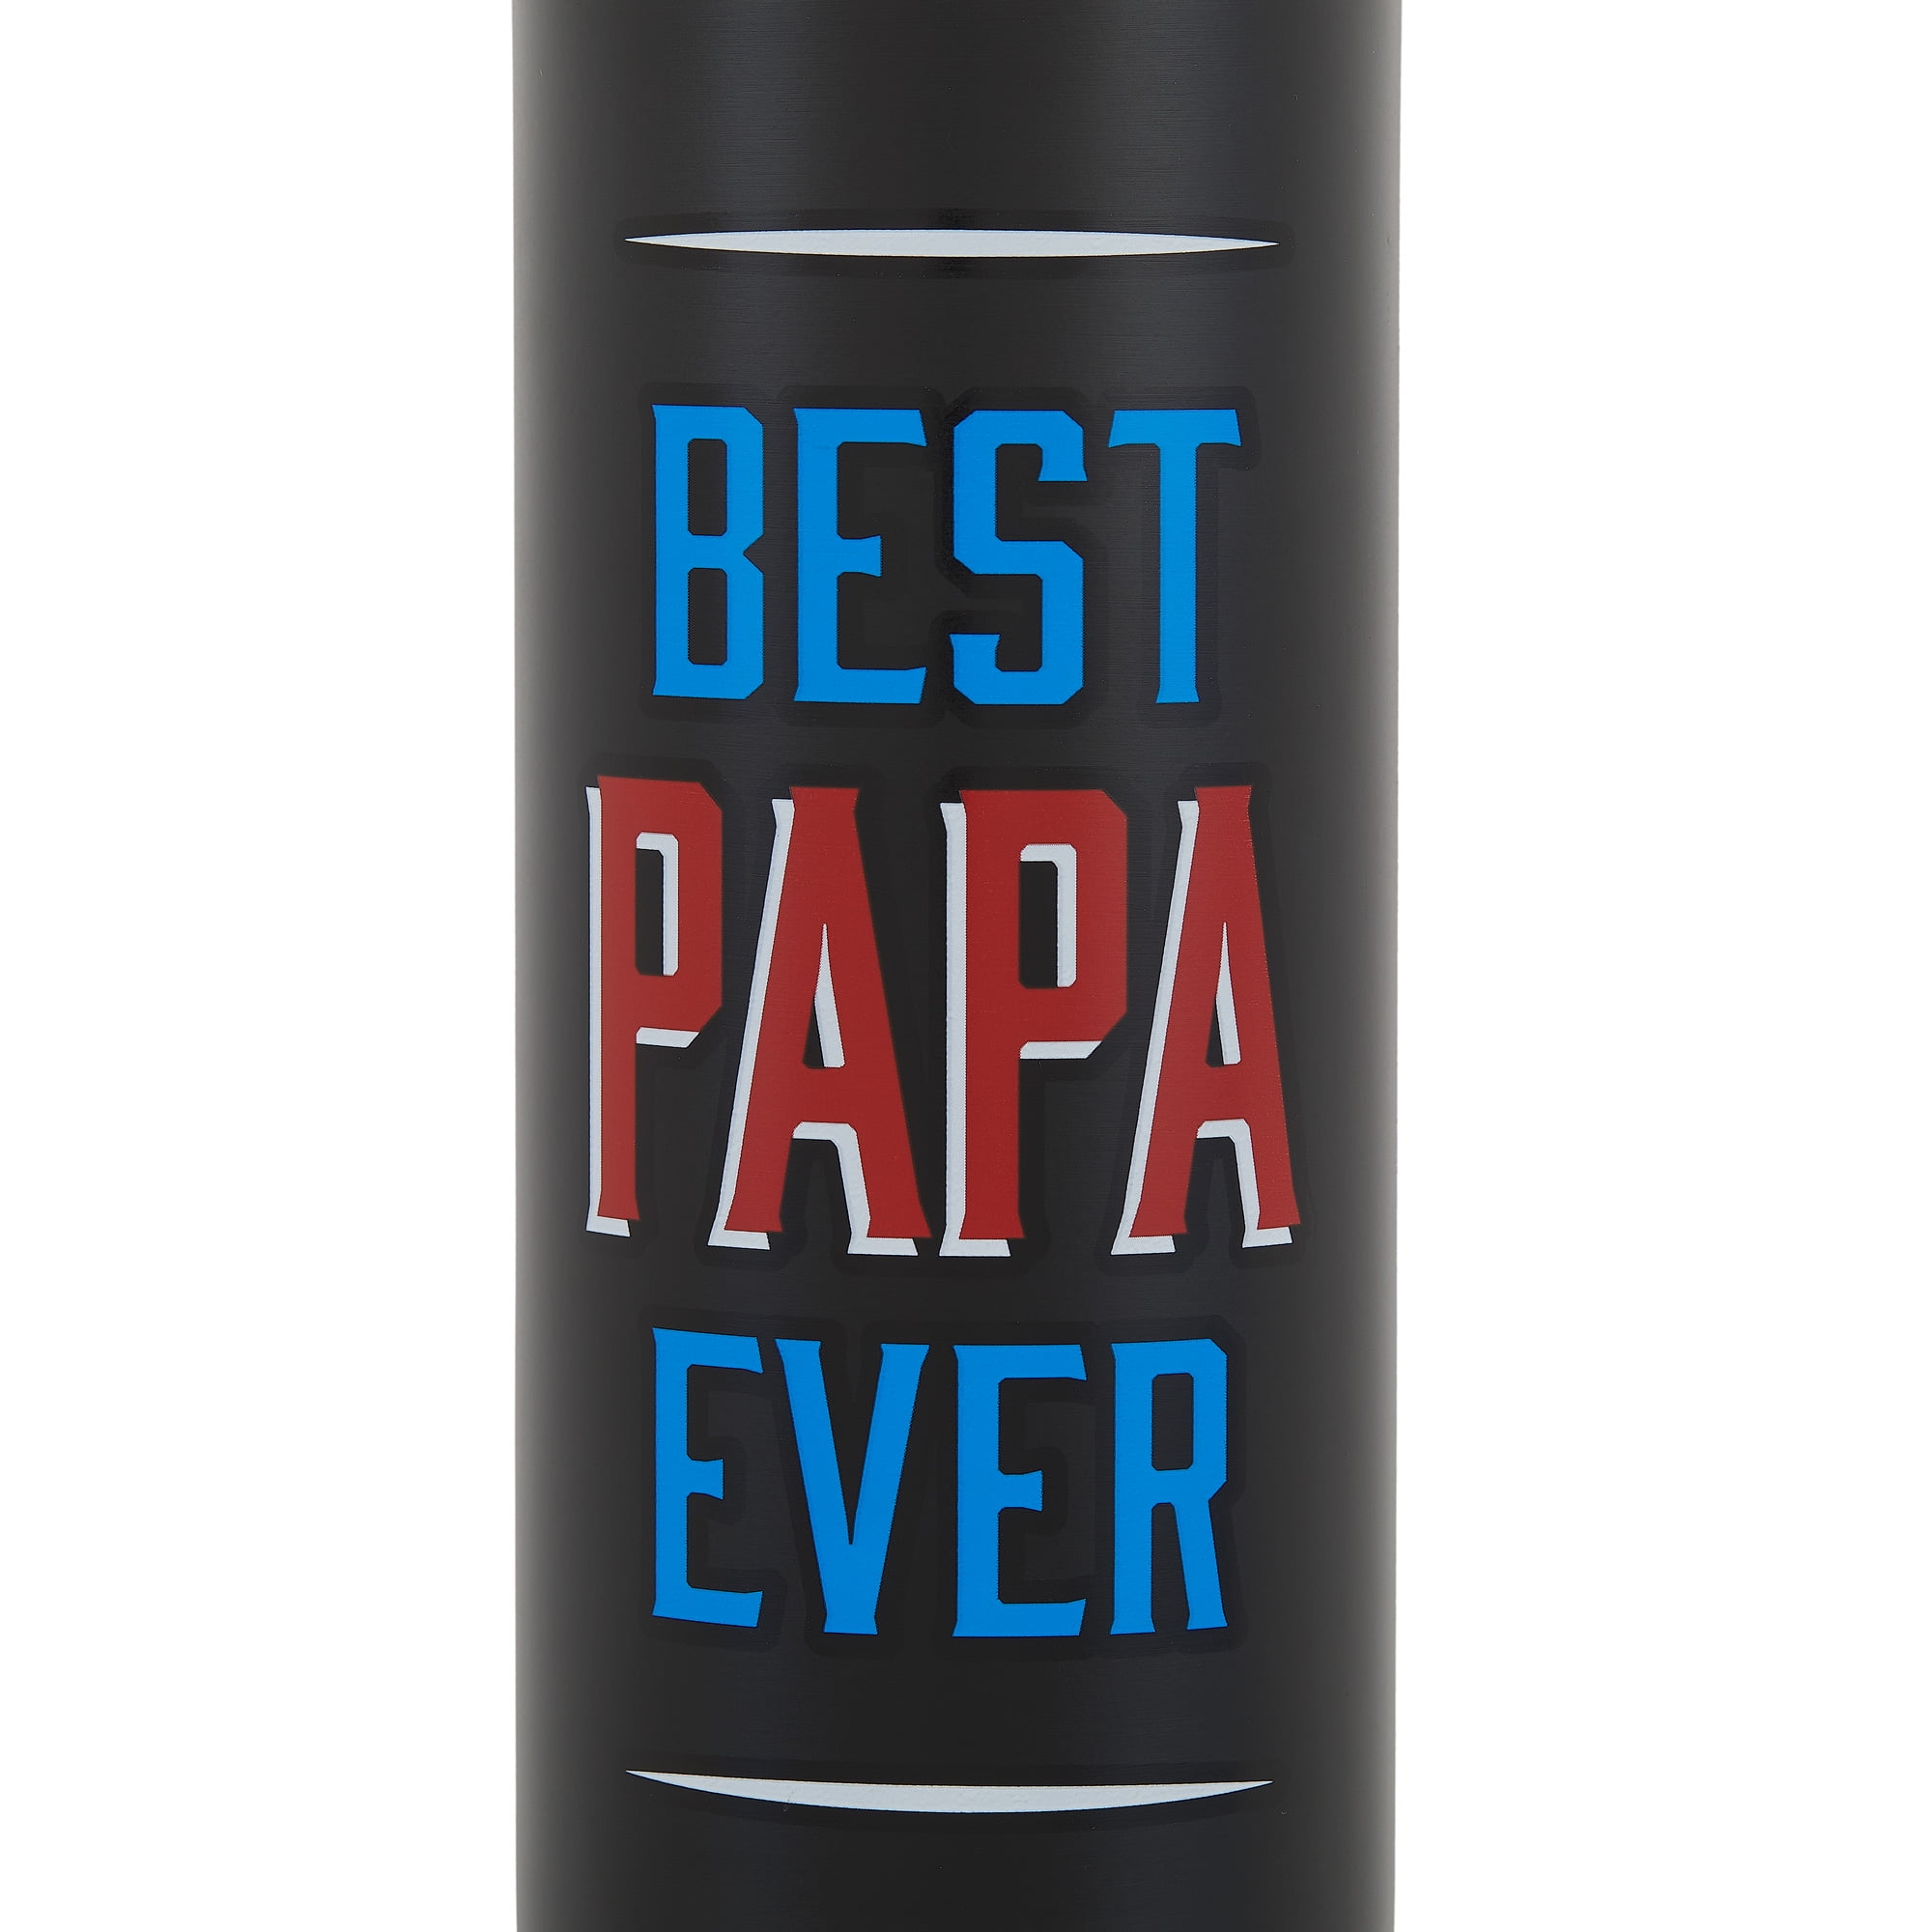 Way to Celebrate Father's Day Stainless Steel 21 oz Travel Water Bottle  with Stopper, “Dad, the Man, the Myth, the Legend” 